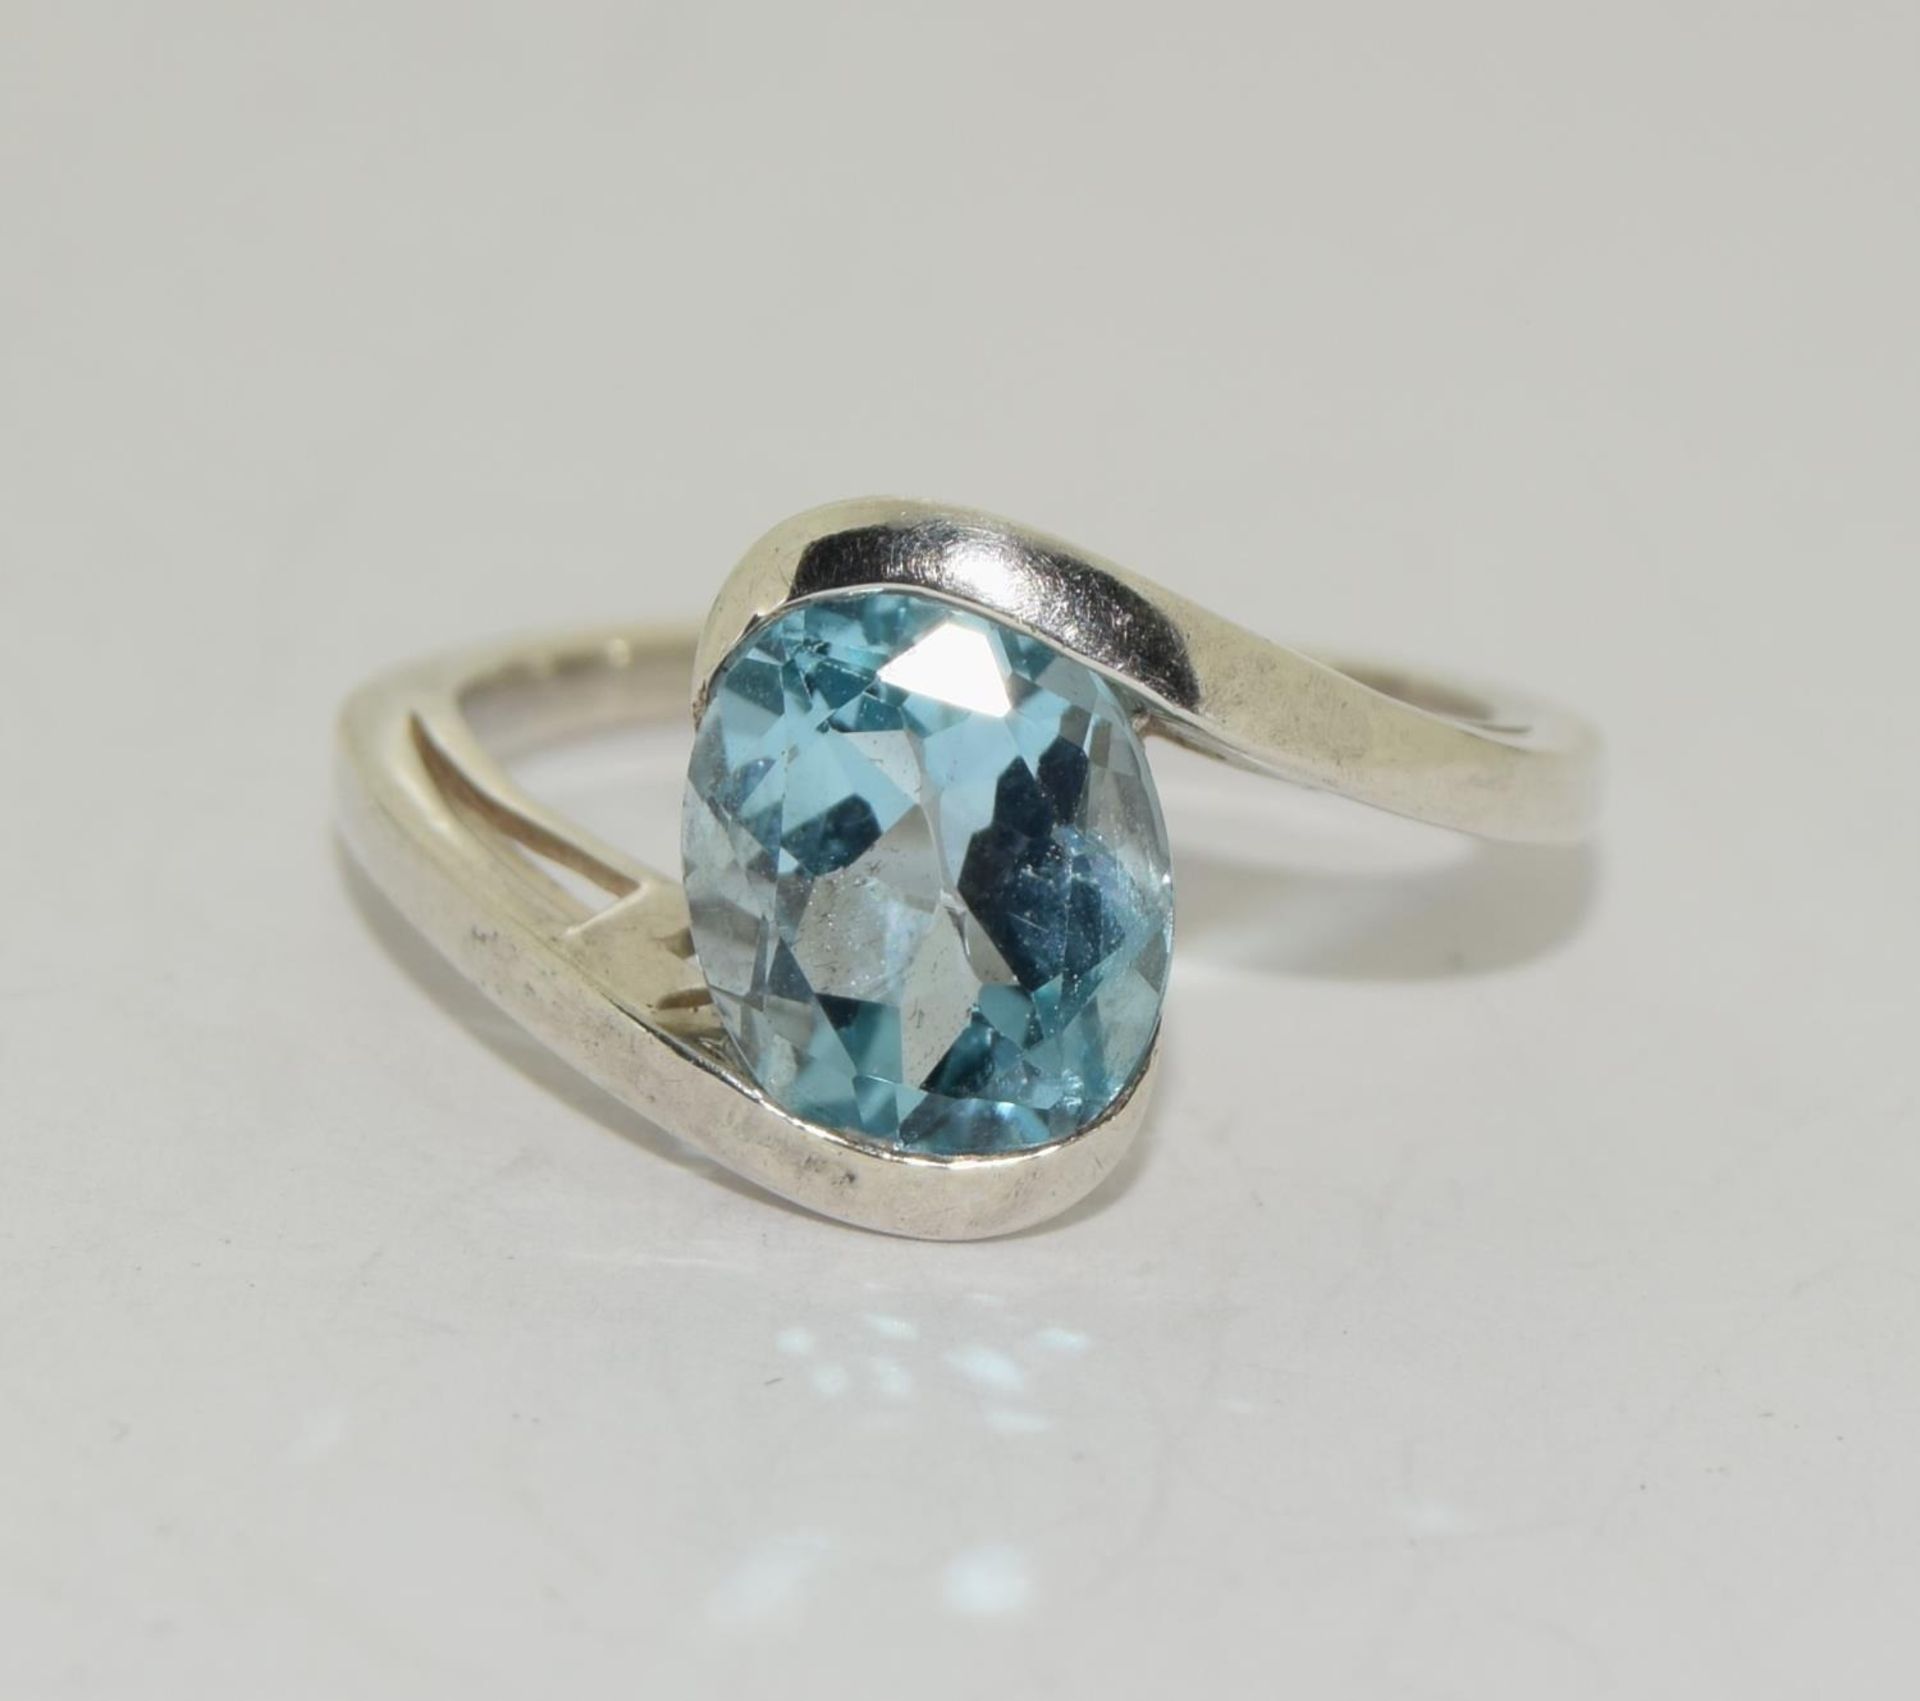 Lovely ice blue topaz 925 silver solitaire ring. Size P 1/2.